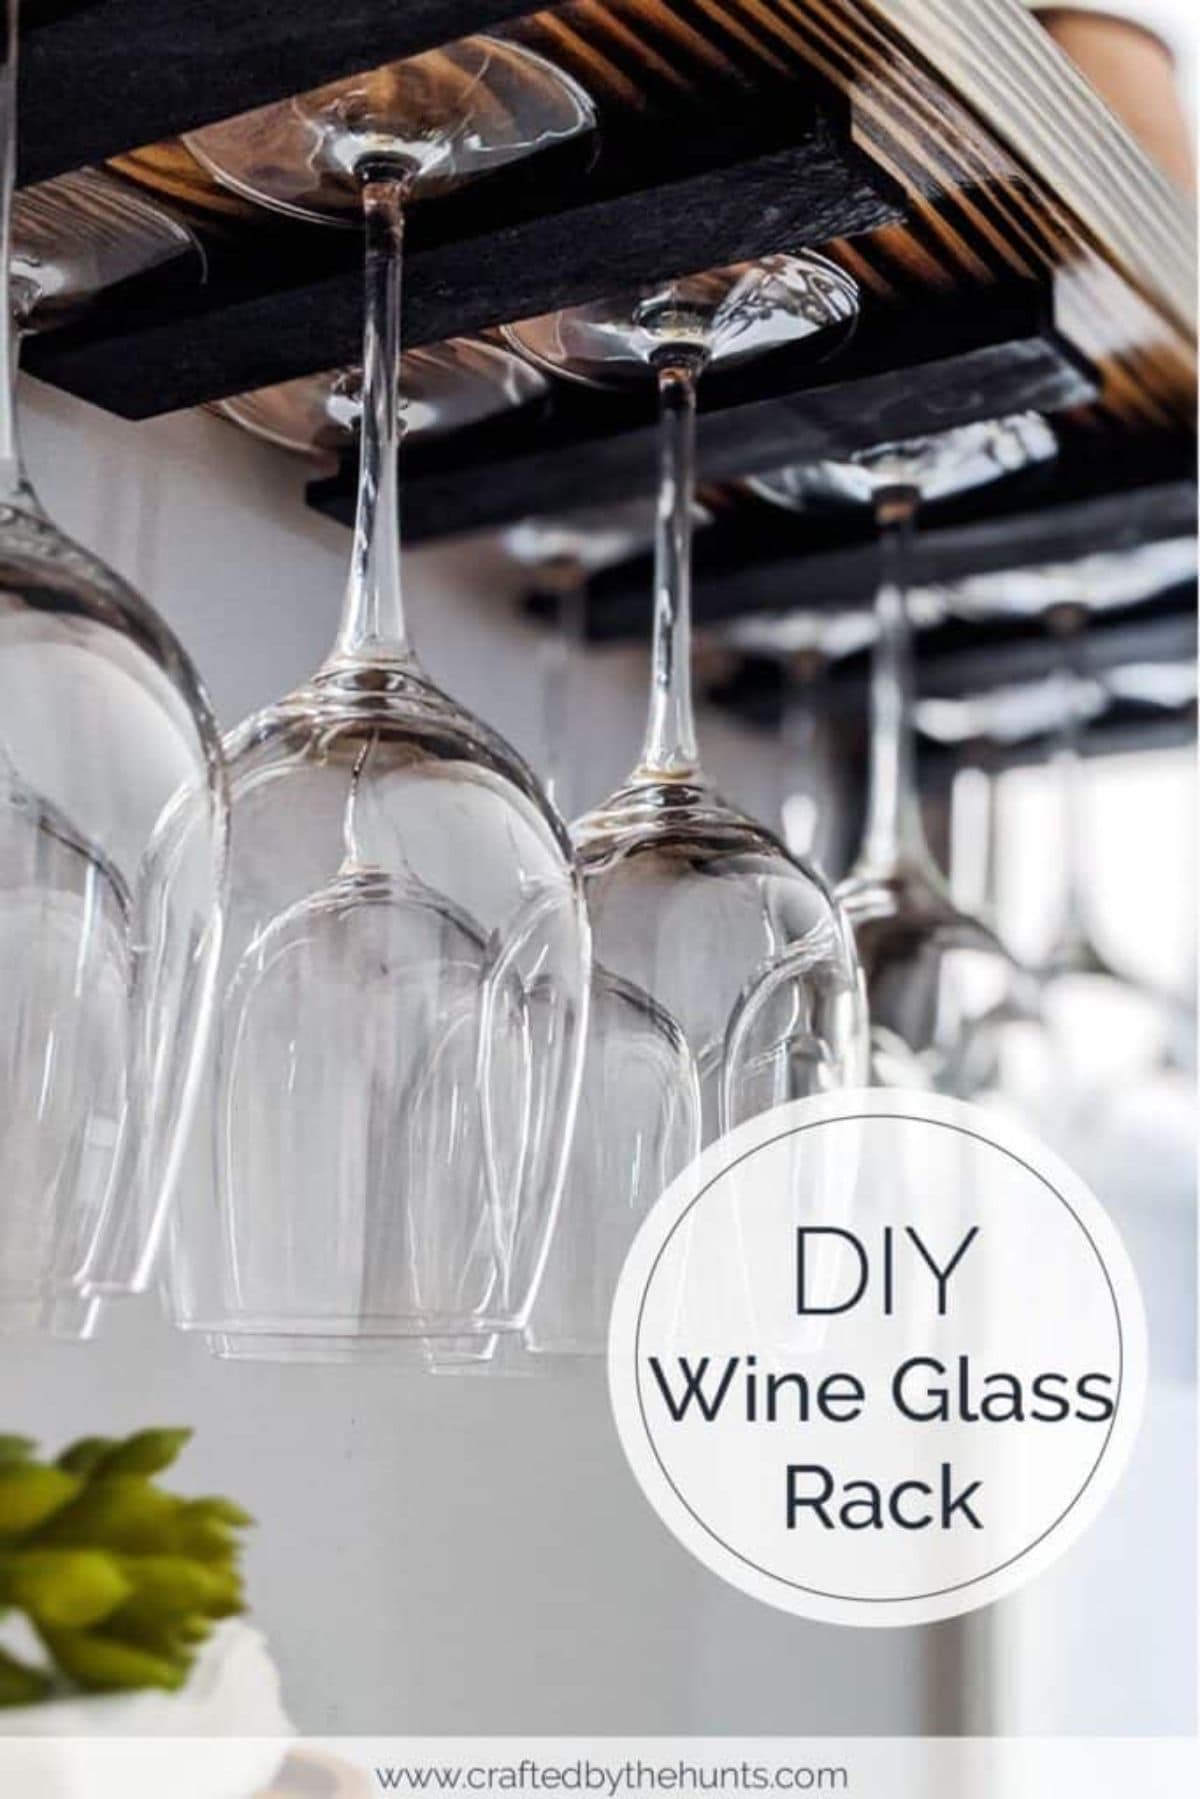 A wine glass rack made of dark wood with large win glasses hooked upside down from it